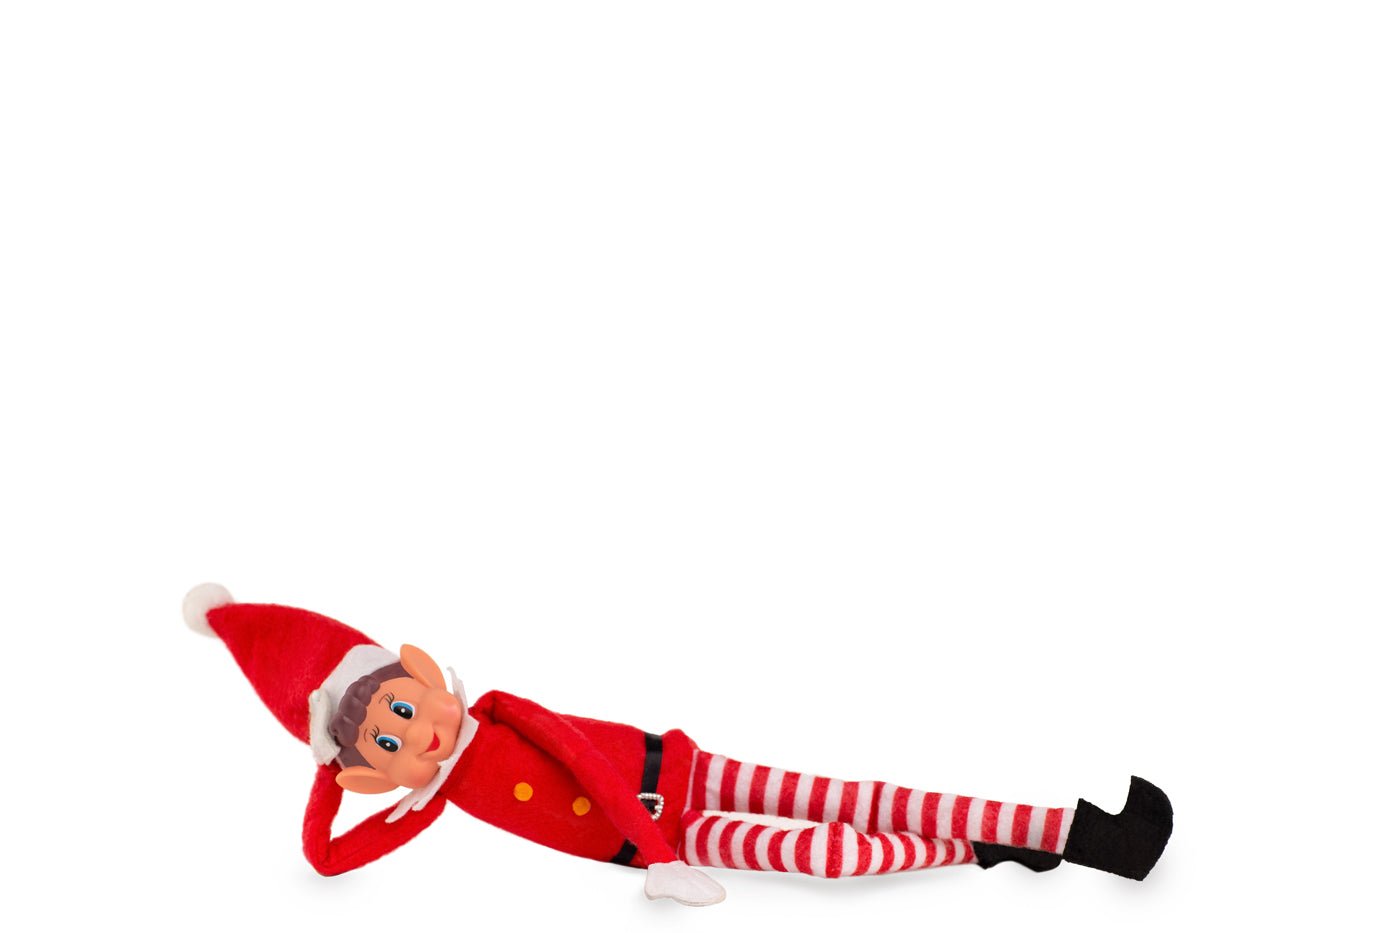 Elf on the Shelf – Fun New Tradition (Or Just More Stress For Parents)? - The Nappy Shop